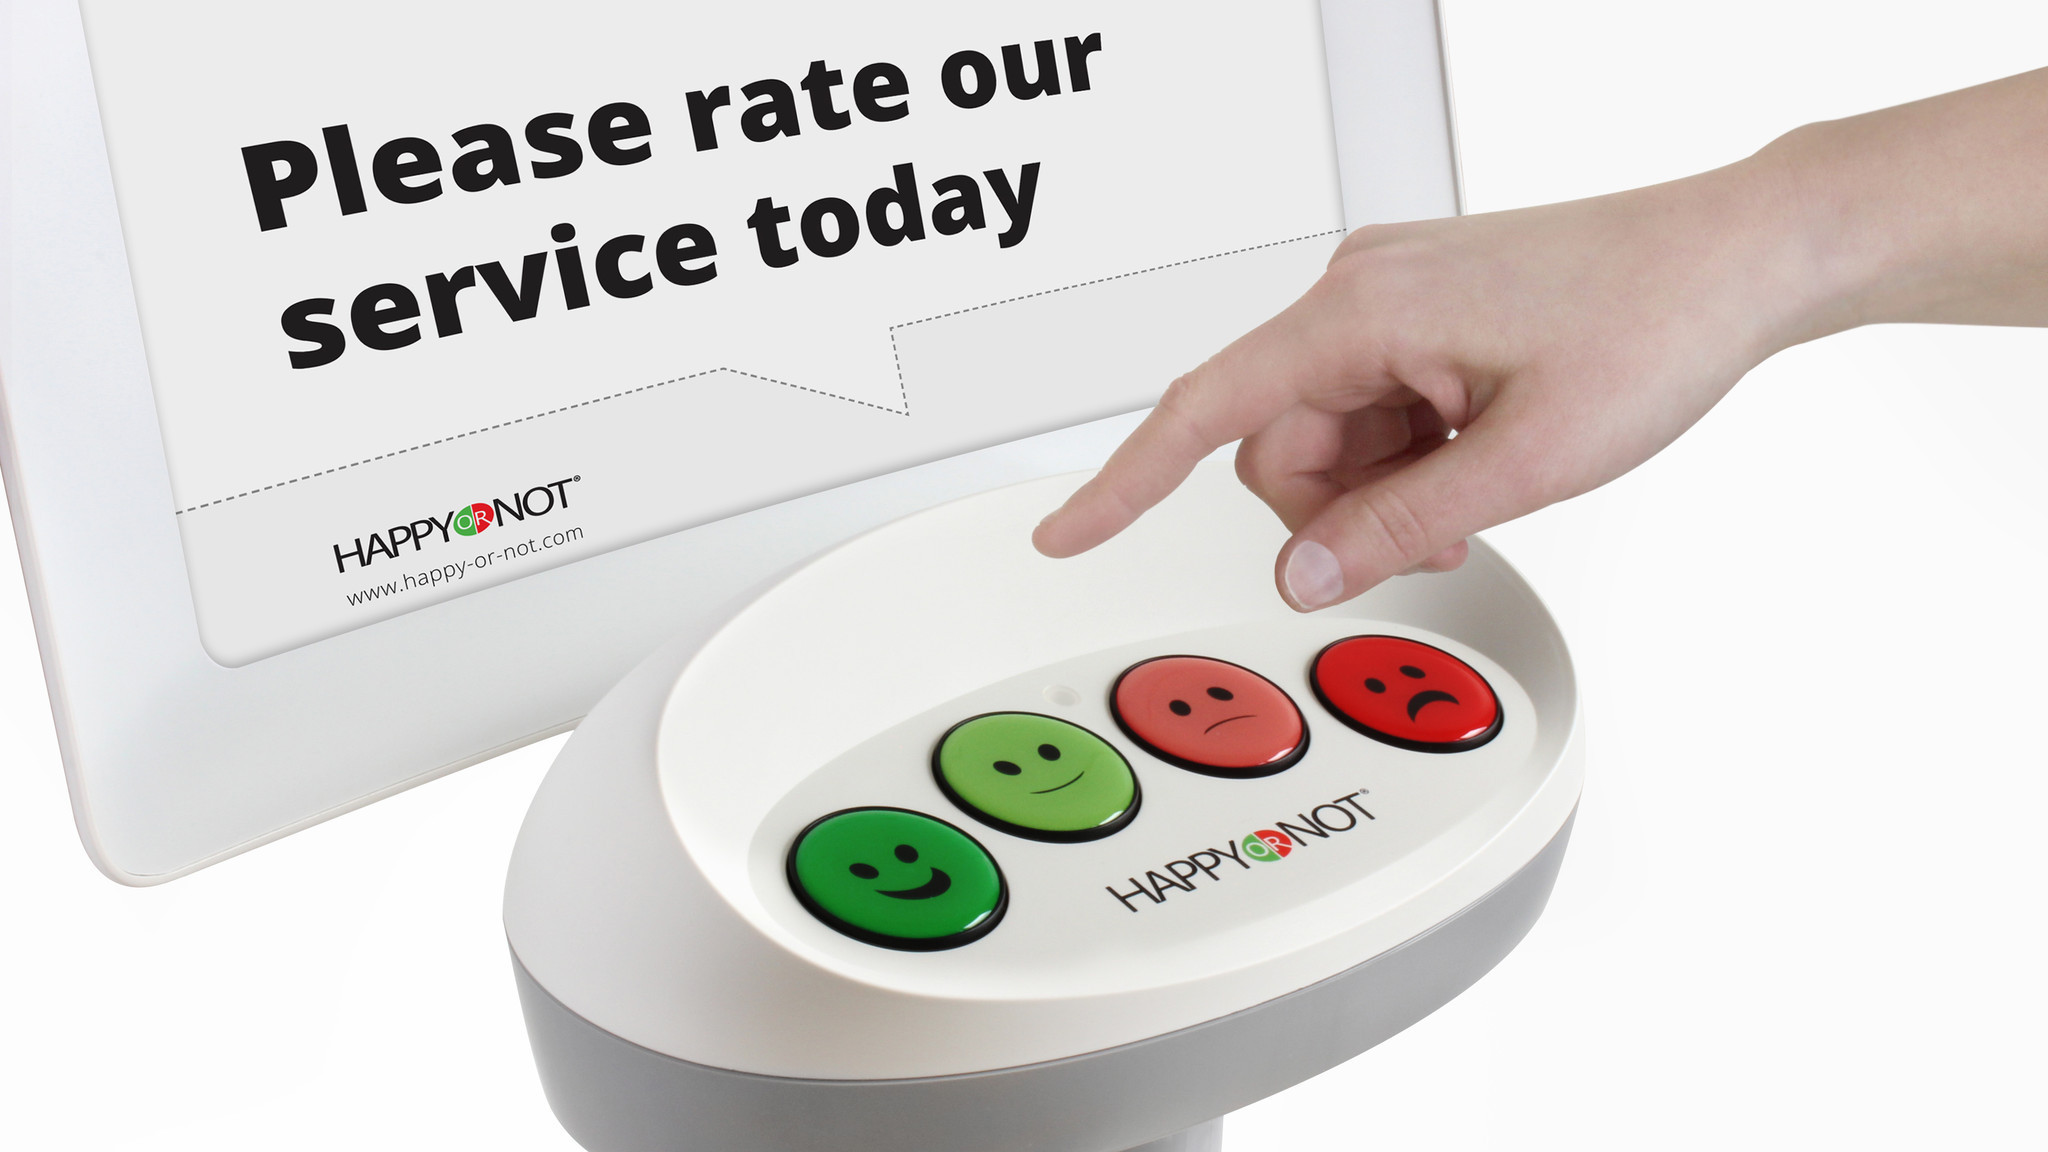 HappyOrNot lets customers give smiley or frowny feedback on the spot